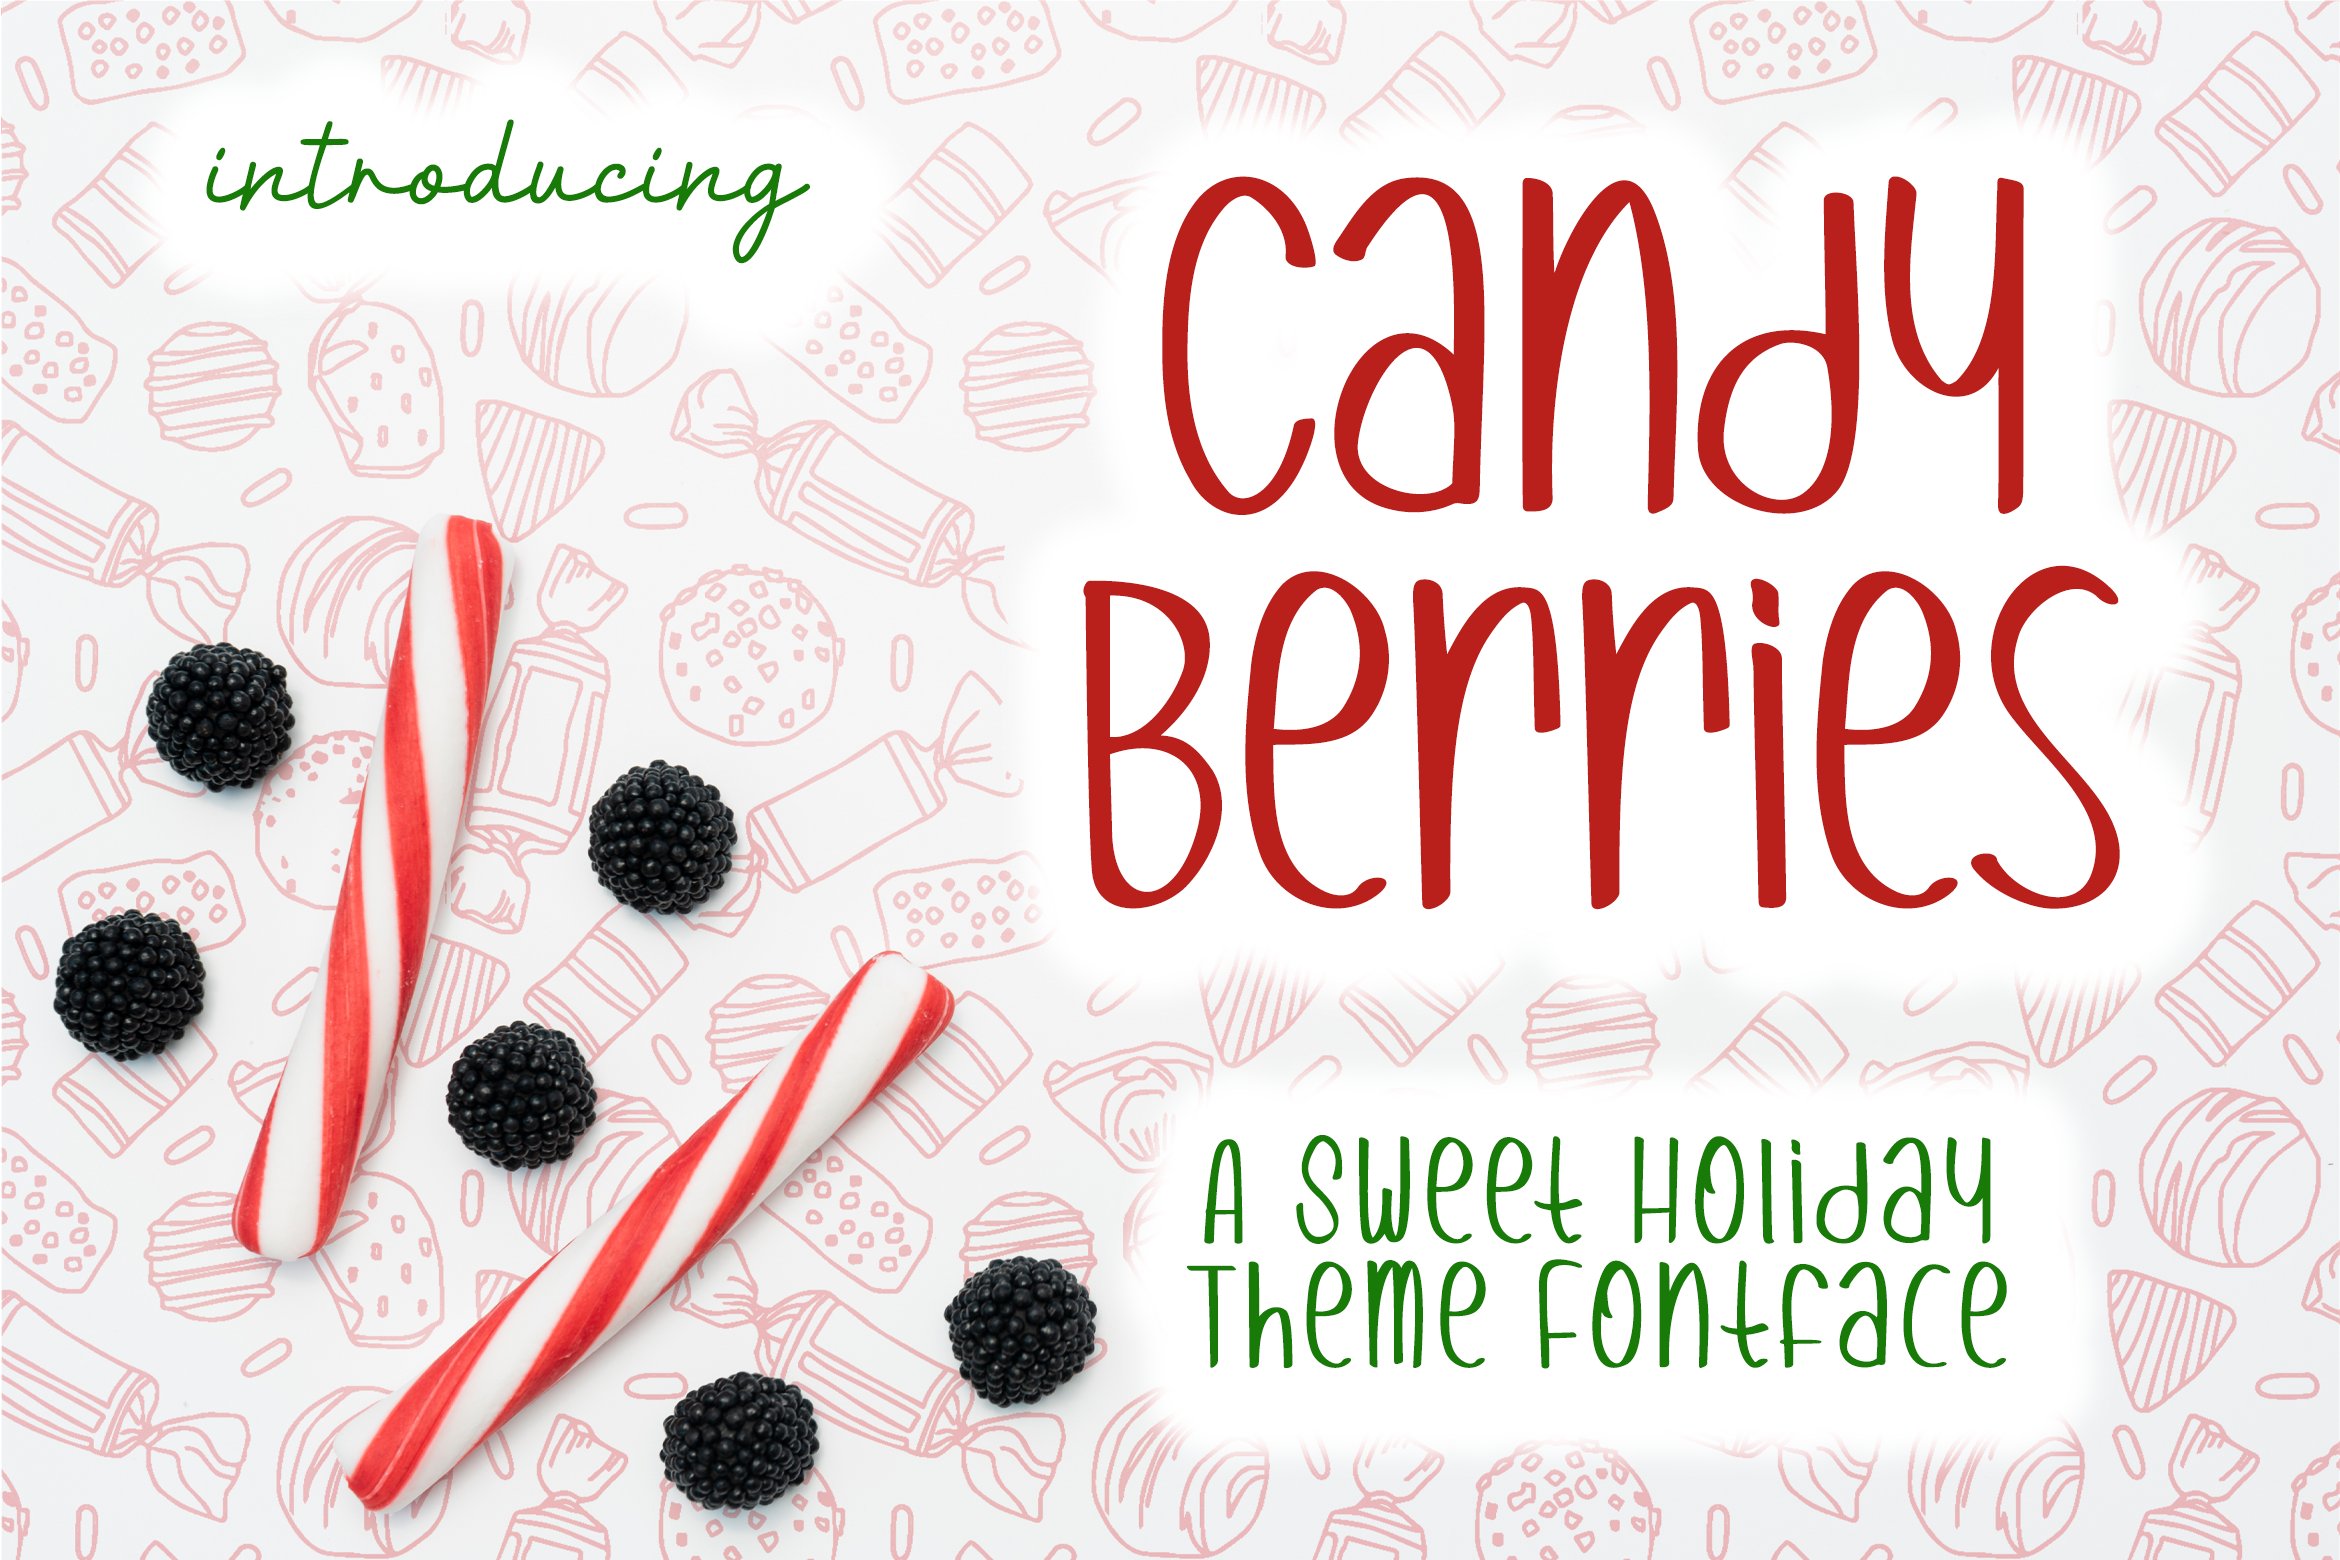 Candy Berries | Holiday Theme Font cover image.